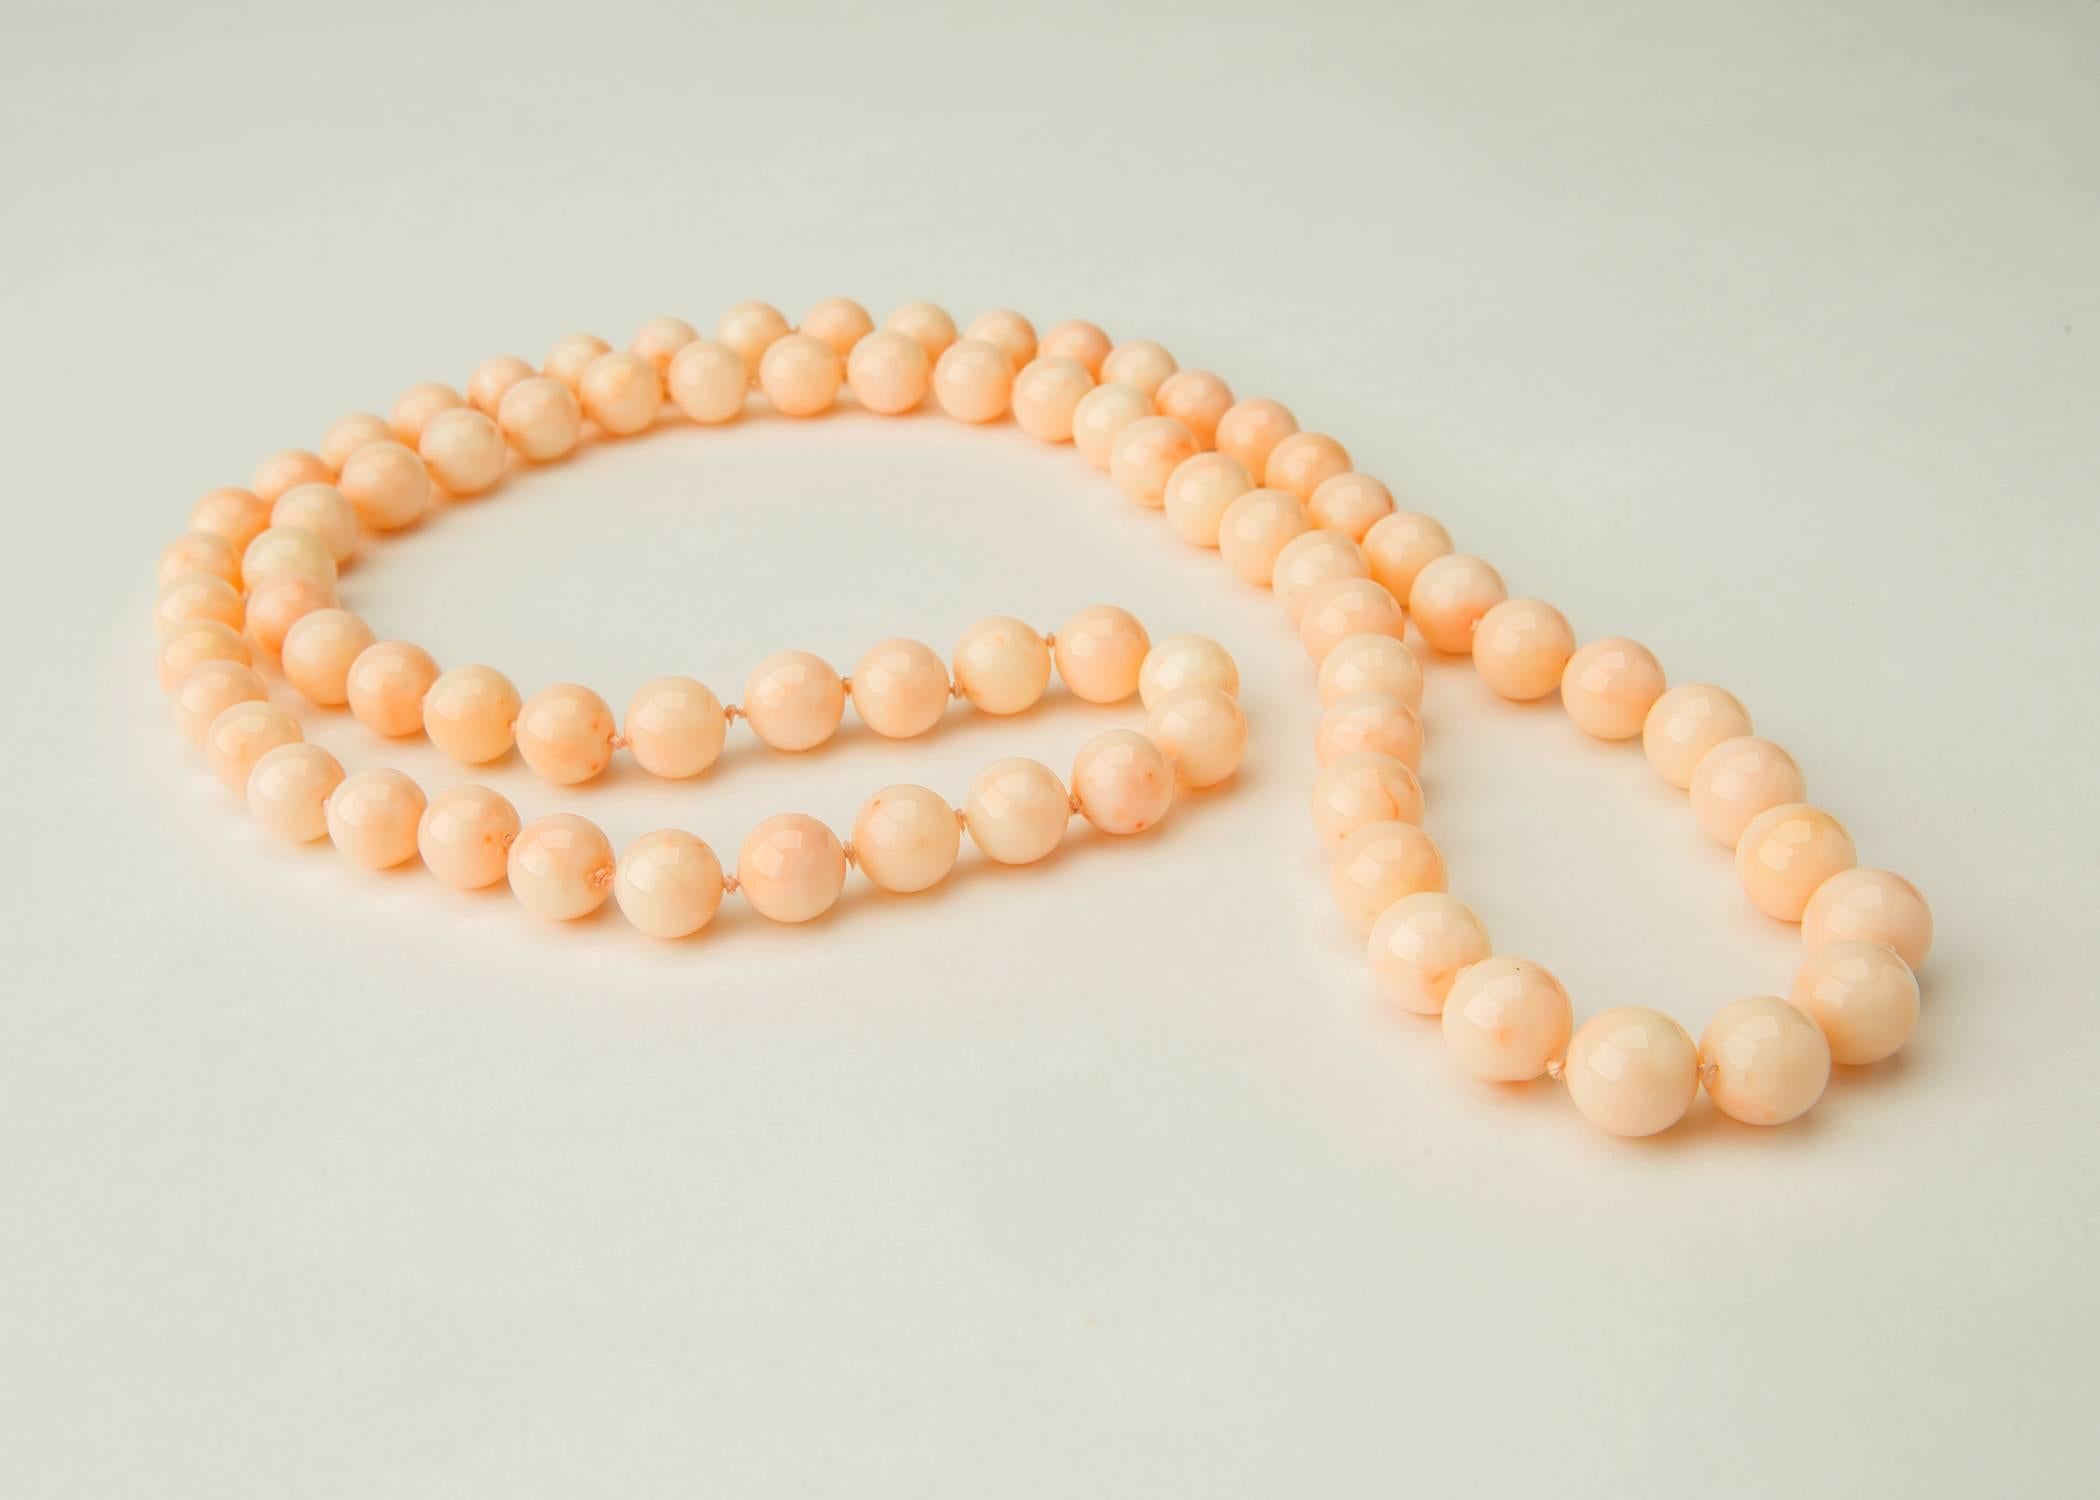 Classic opera length strand of beautiful angel skin coral beads. 77 beads 11.00 to 12.00 mm in size create this 38 inch necklace. 